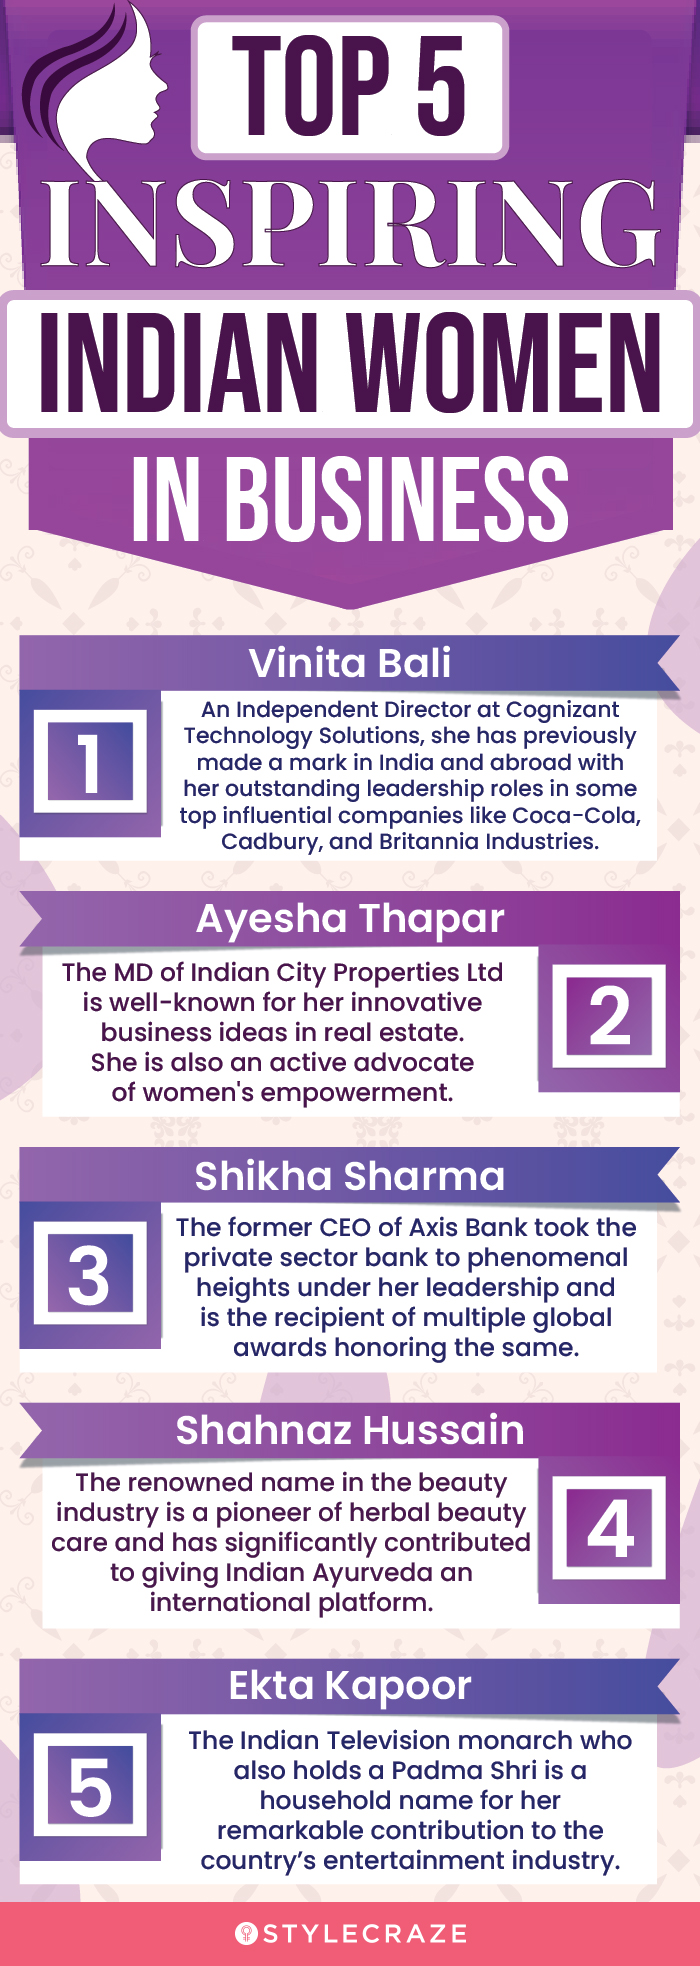 top 5 inspiring indian women in business (infographic)